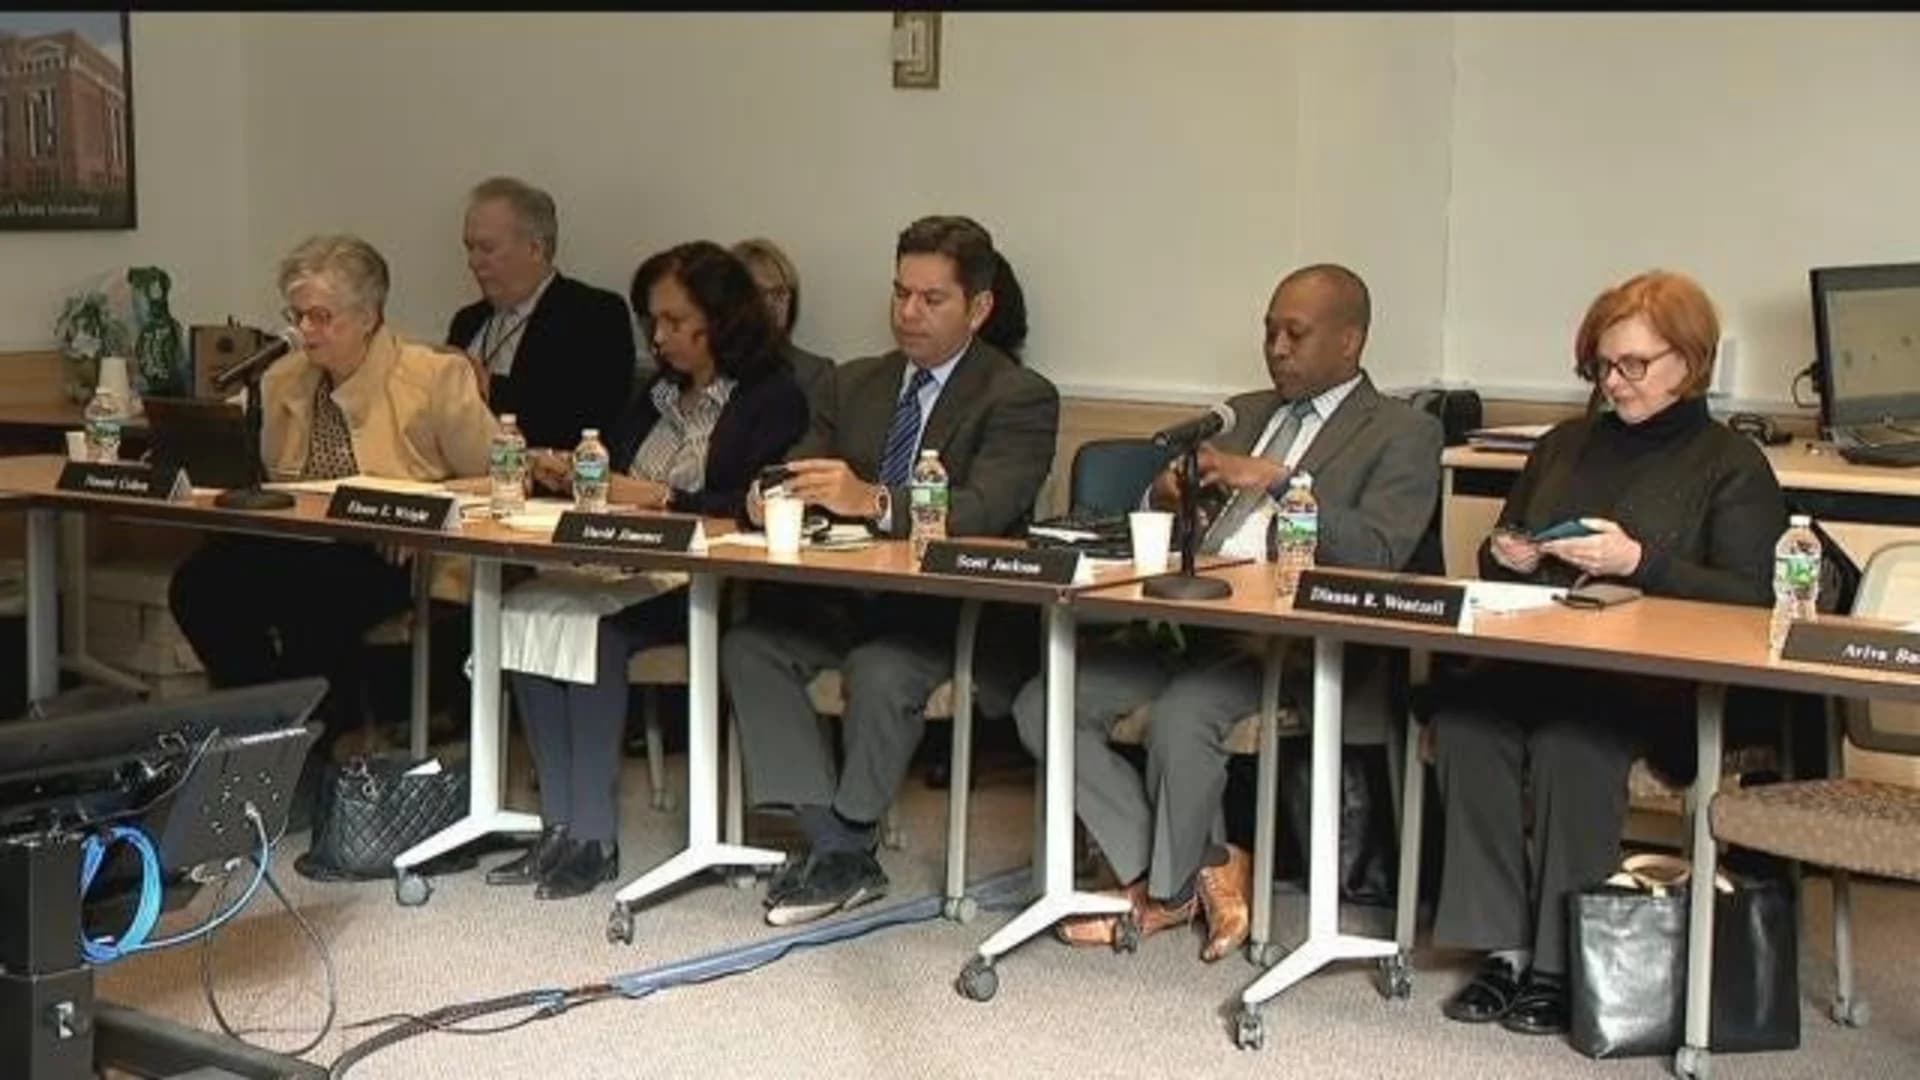 Regents board approves merger of state’s community colleges